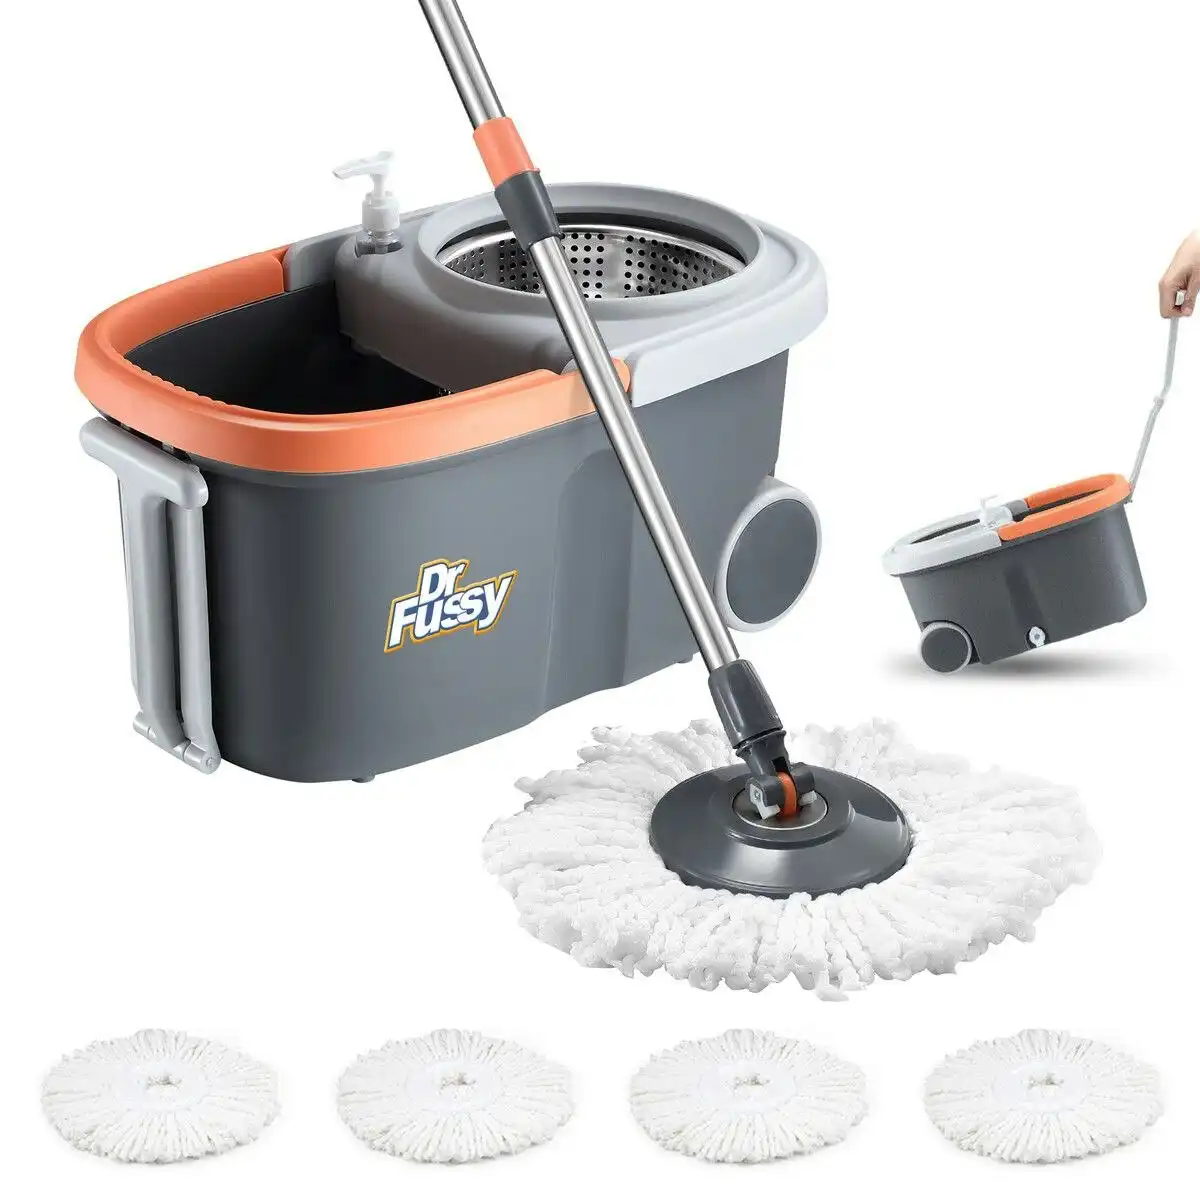 Dr FUSSY Spin Mop and Bucket Kit Wood Tile Floor Cleaner 4 Microfibre Heads Magic Dry Twist Dust Cleaning System